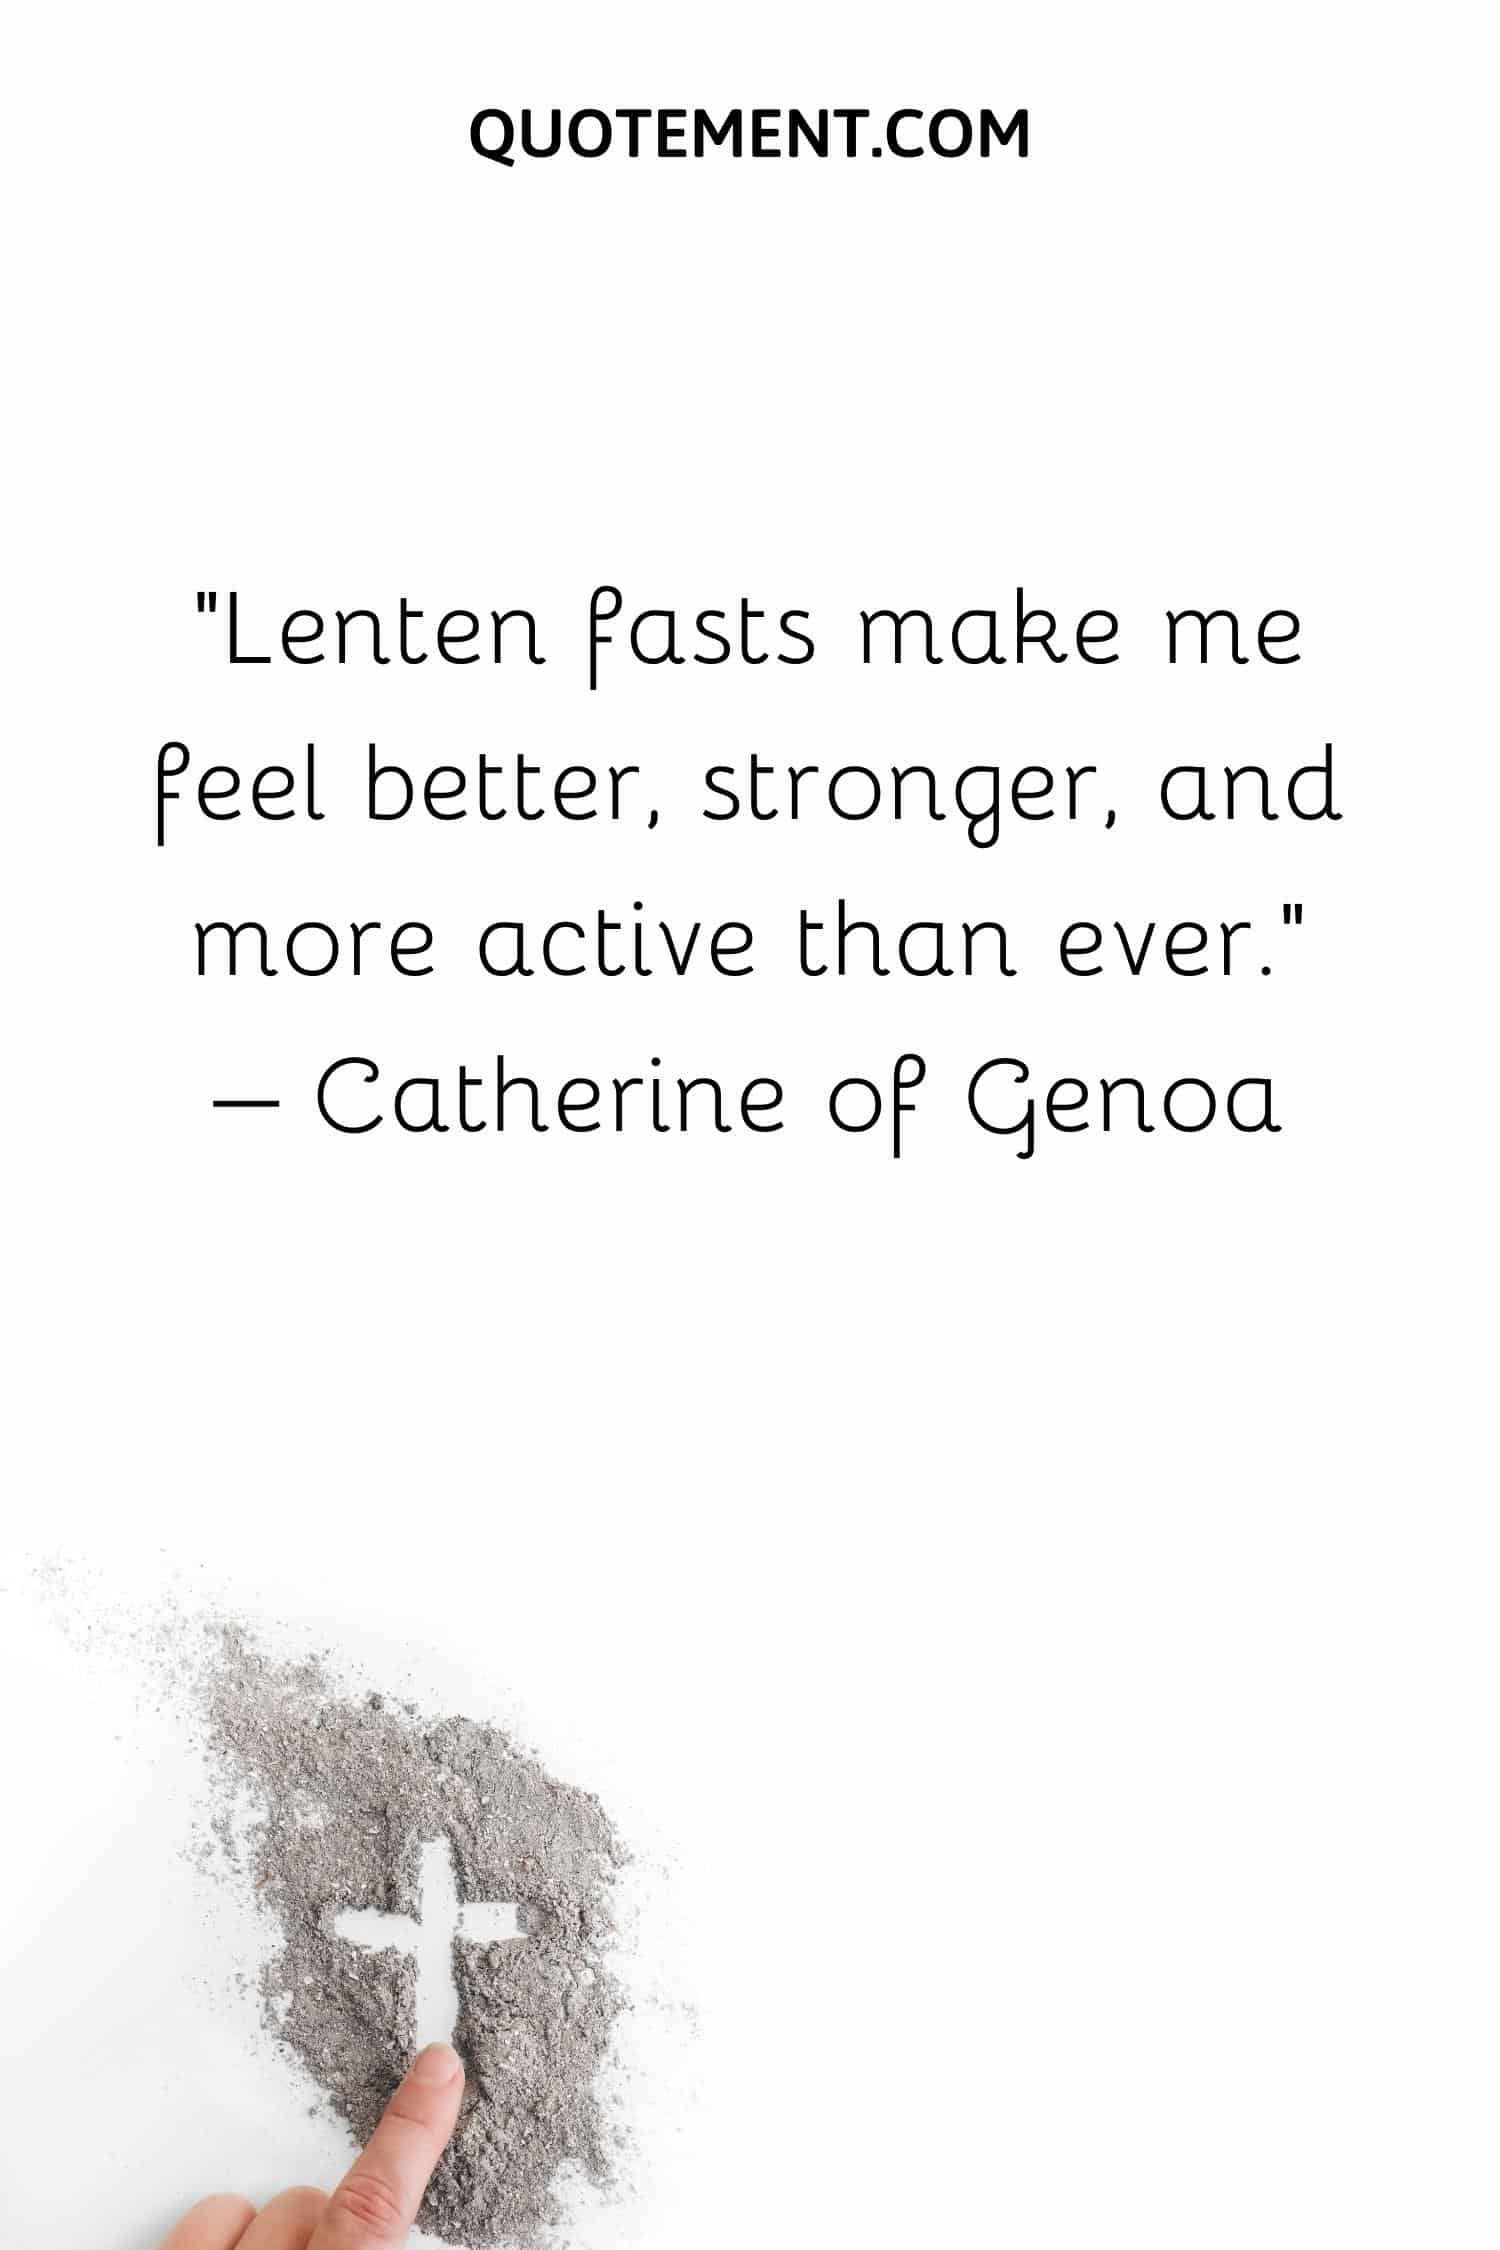 Lenten fasts make me feel better, stronger, and more active than ever